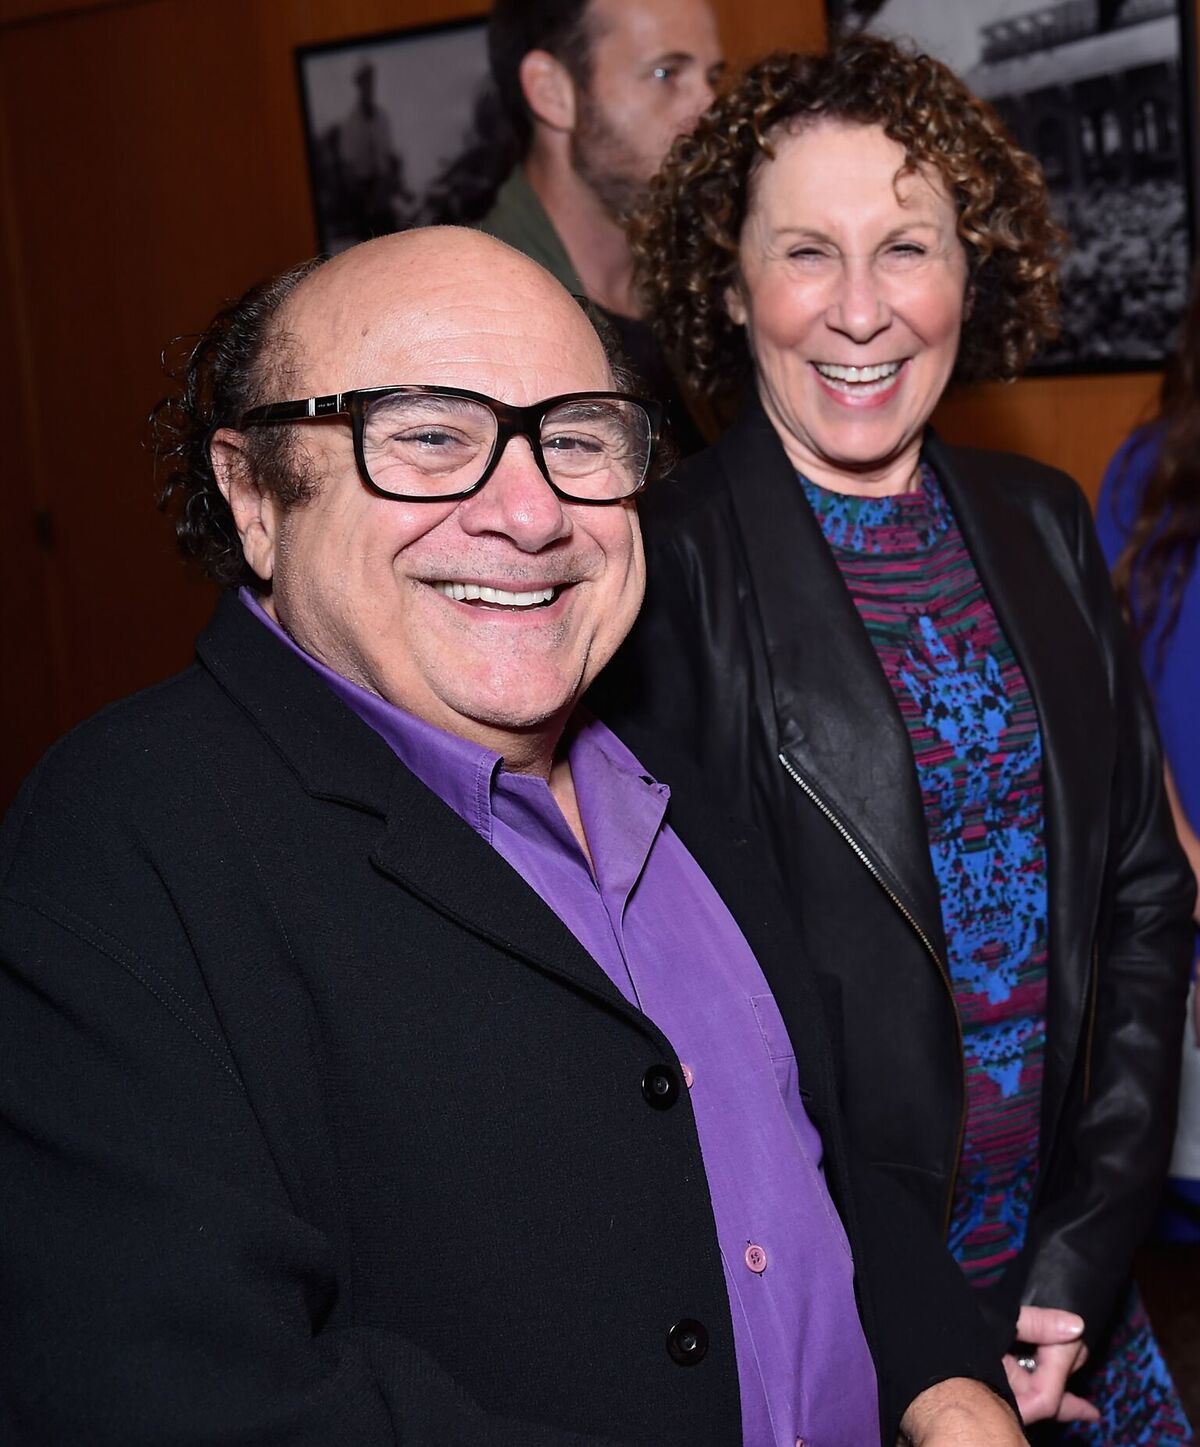 Danny DeVito and Rhea Pearlman attend the premiere of Amplify's "The Better Angels." | Source: Getty Images